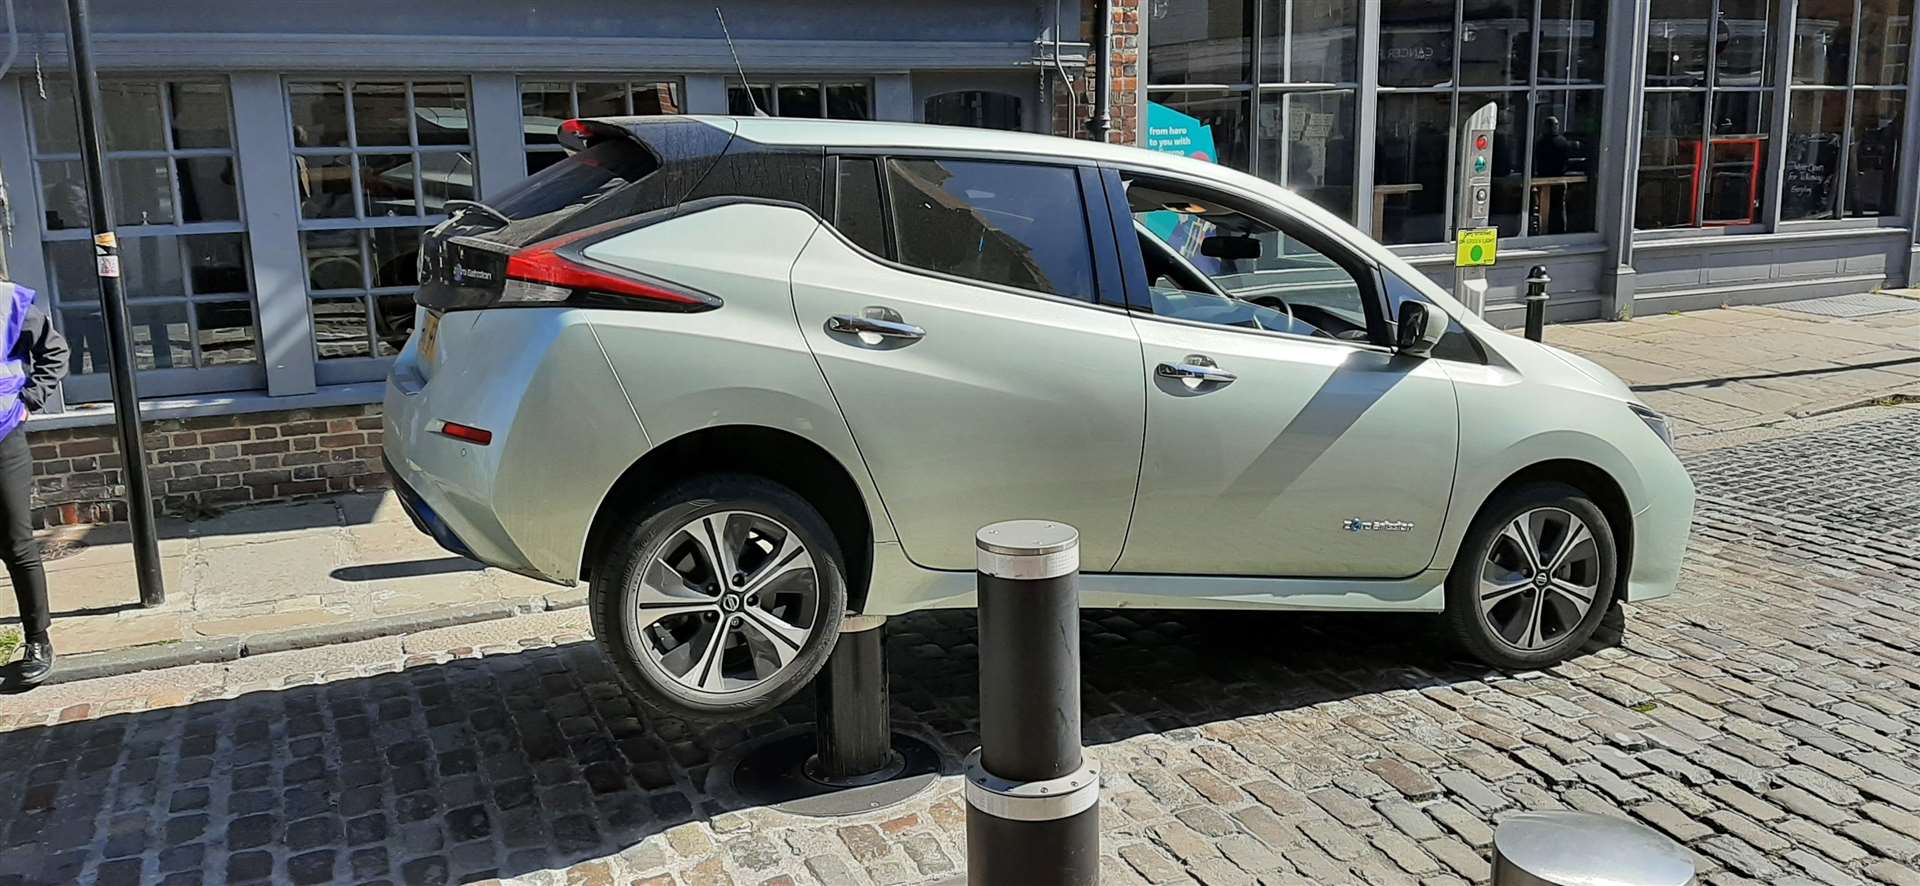 A Nissan Leaf trapped on top of the bollards Picture: Andrew Corby